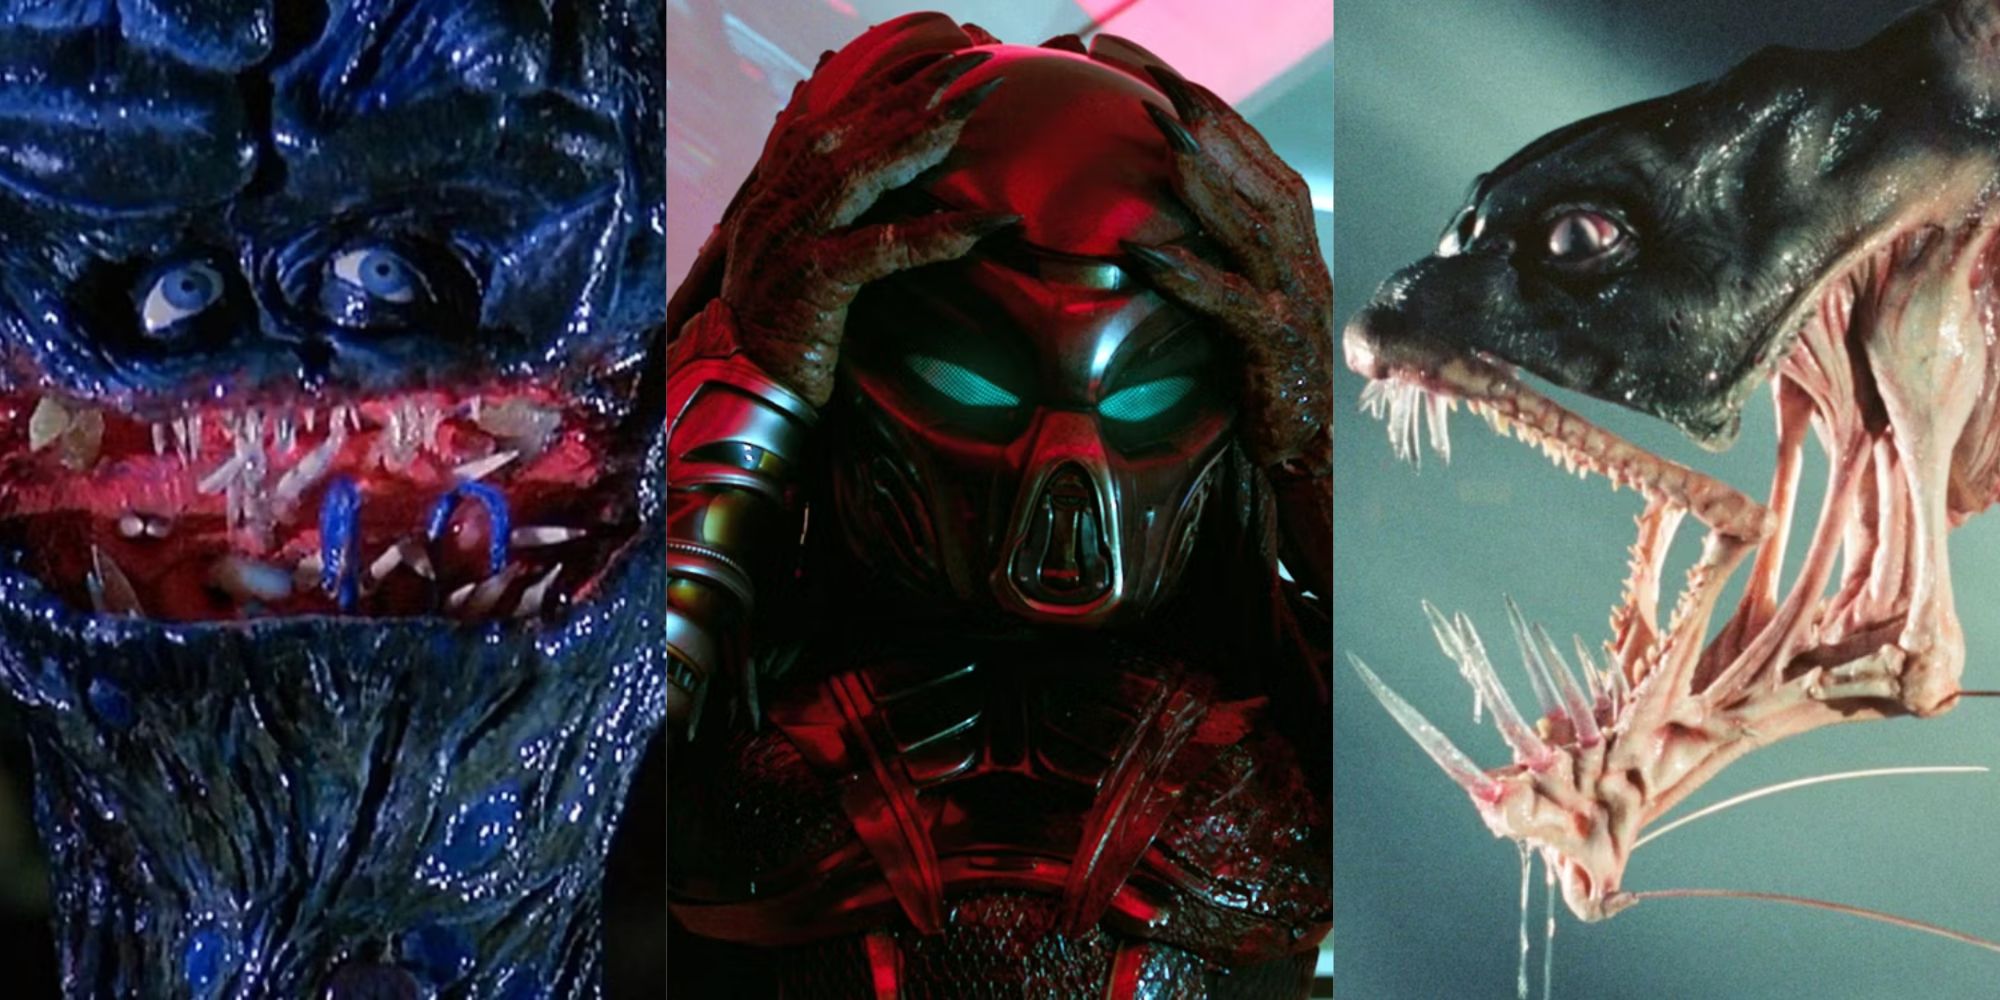 A split image of 80s movie monsters